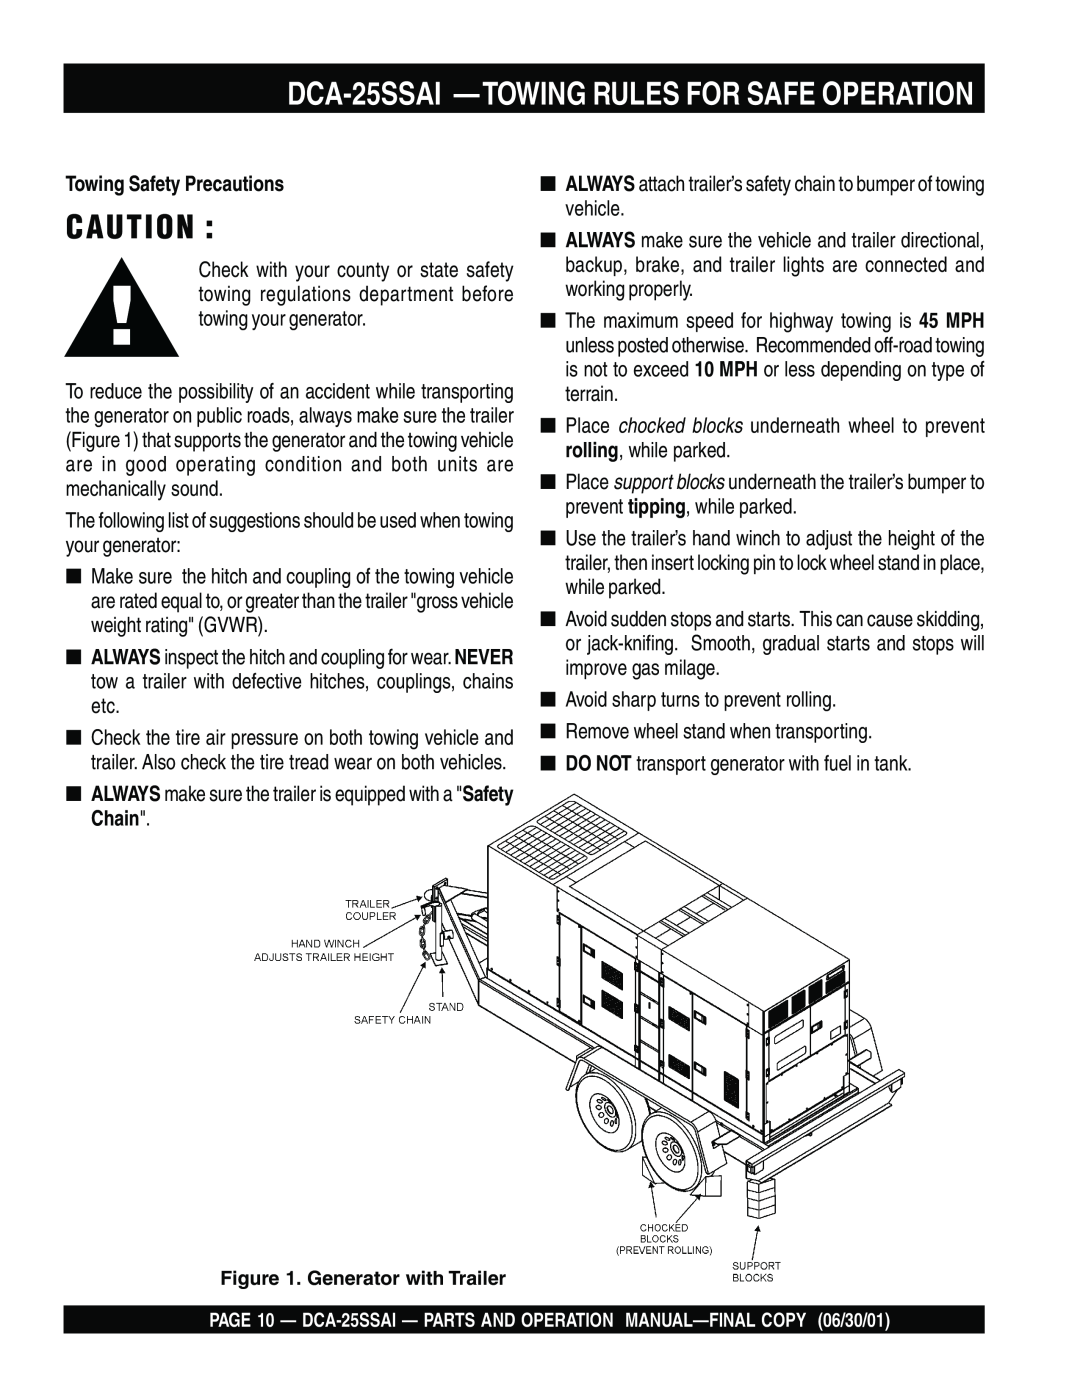 Multiquip operation manual DCA-25SSAI -TOWING RULES FOR SAFE OPERATION, Towing Safety Precautions 